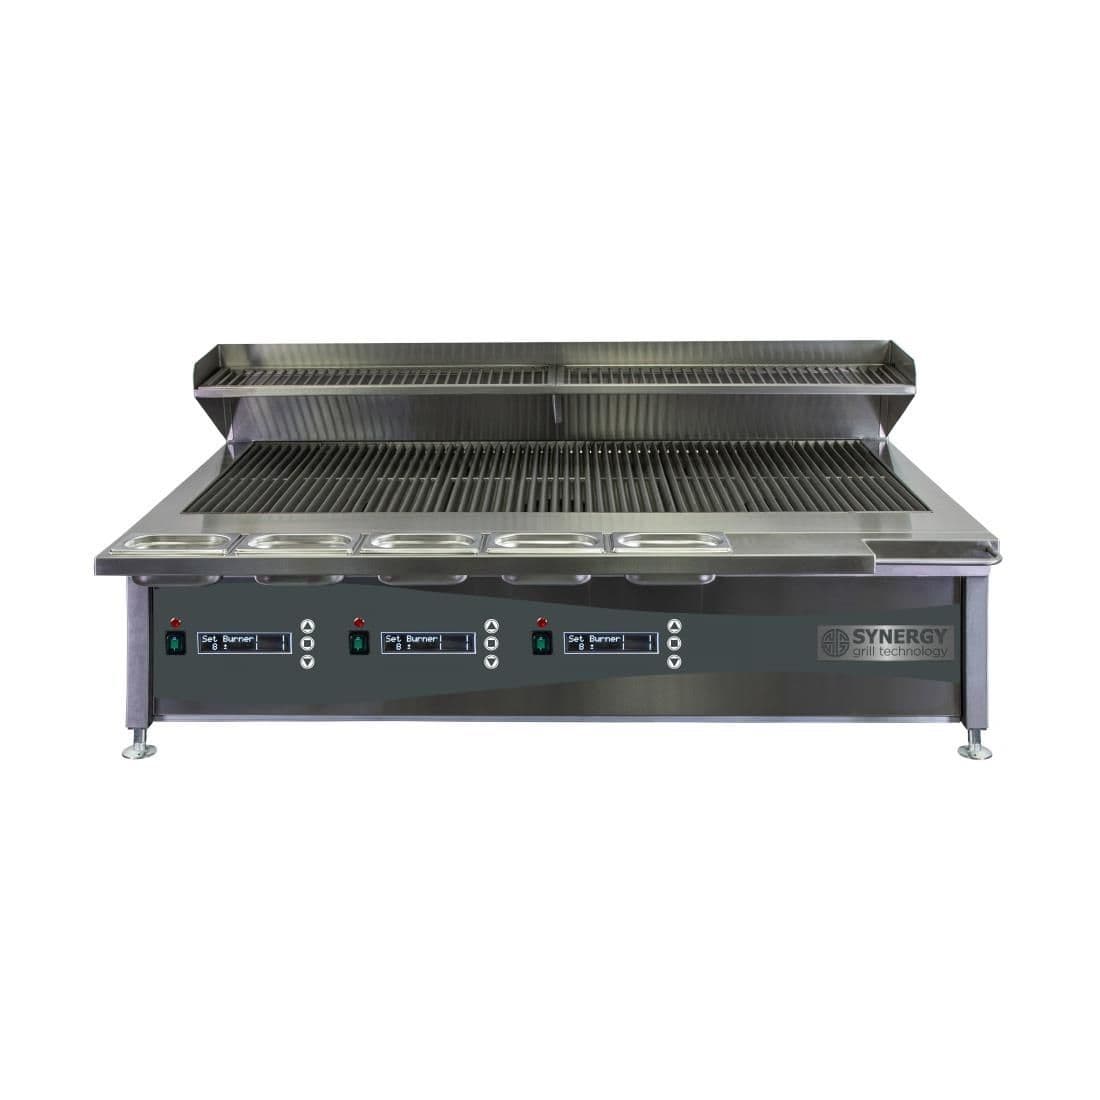 CX886 Synergy Grill Gas Trilogy Chargrill ST1300 JD Catering Equipment Solutions Ltd